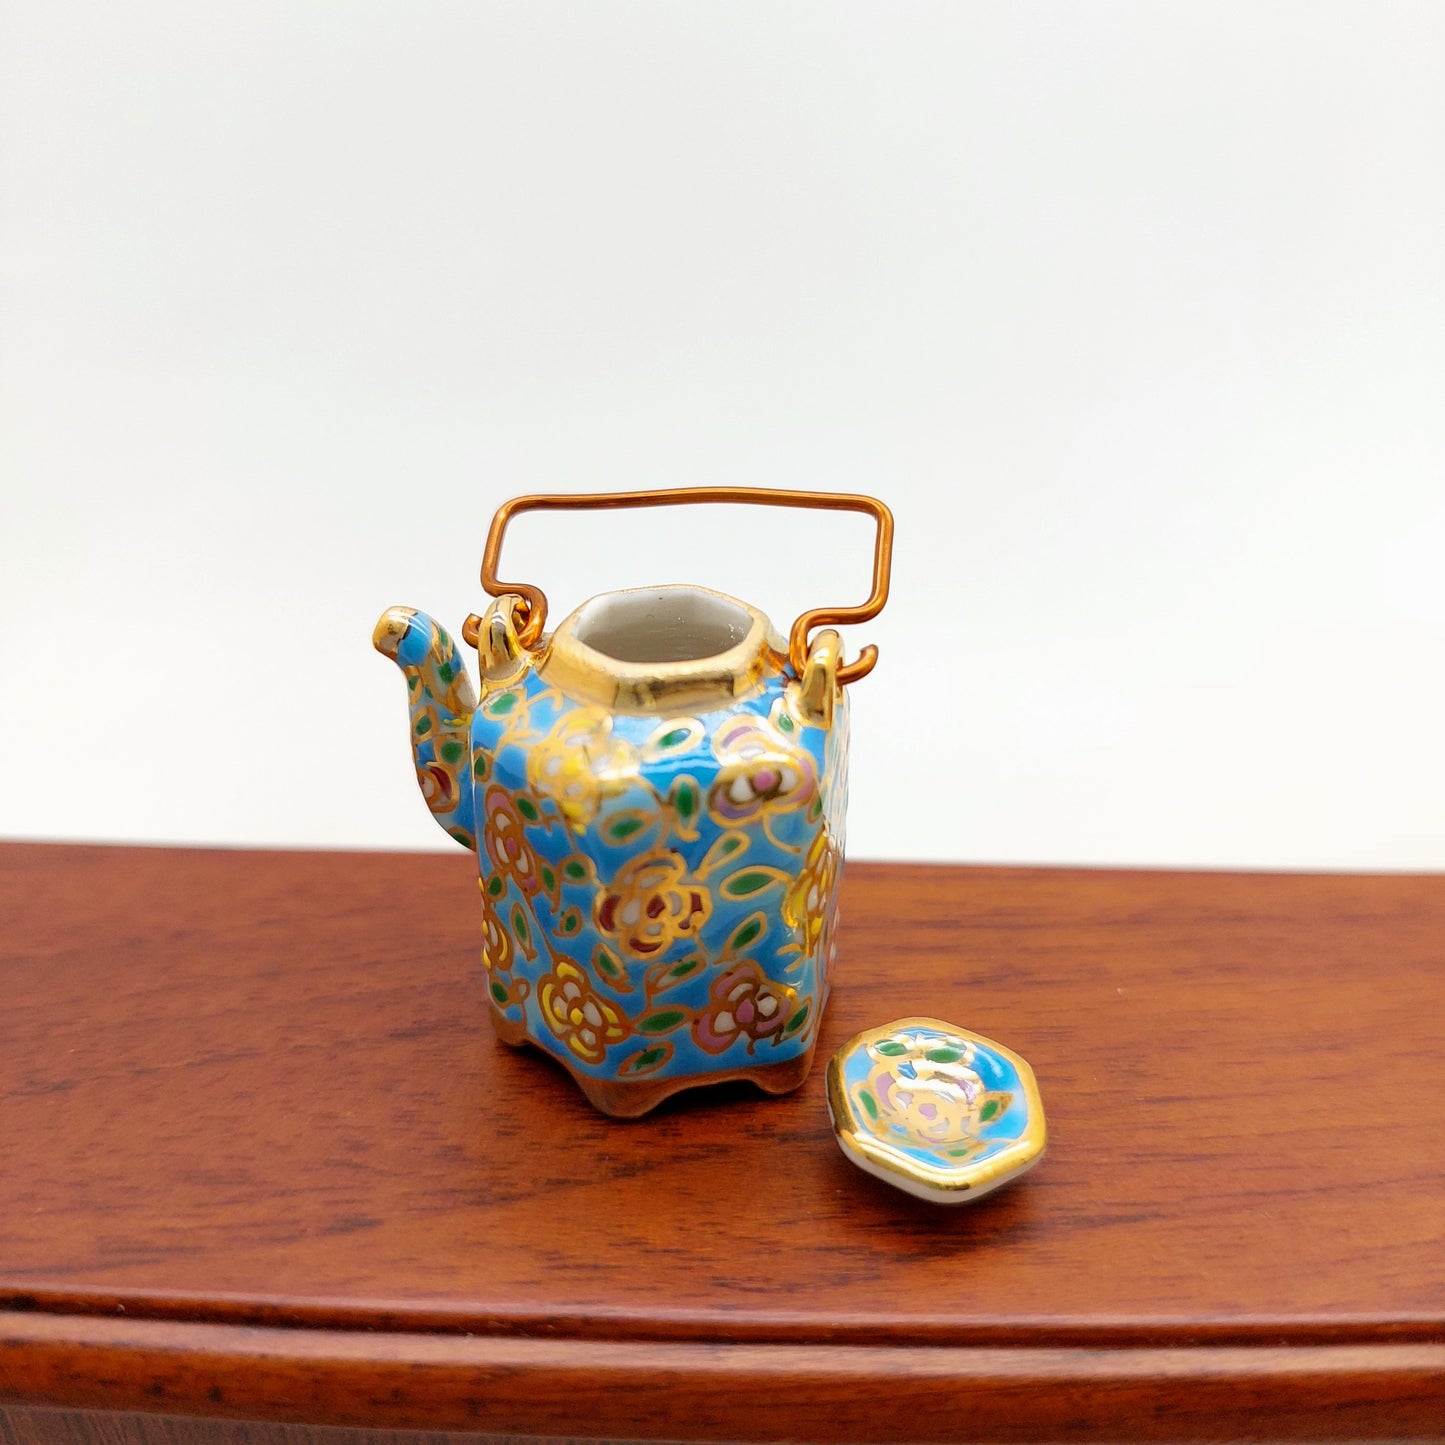 Ceramic Porcelain Miniature Chinese Teapot with Copper Handle, Benjarong patterns Golden Dots, Dollhouse Decoration, Gift for Teapot Lovers